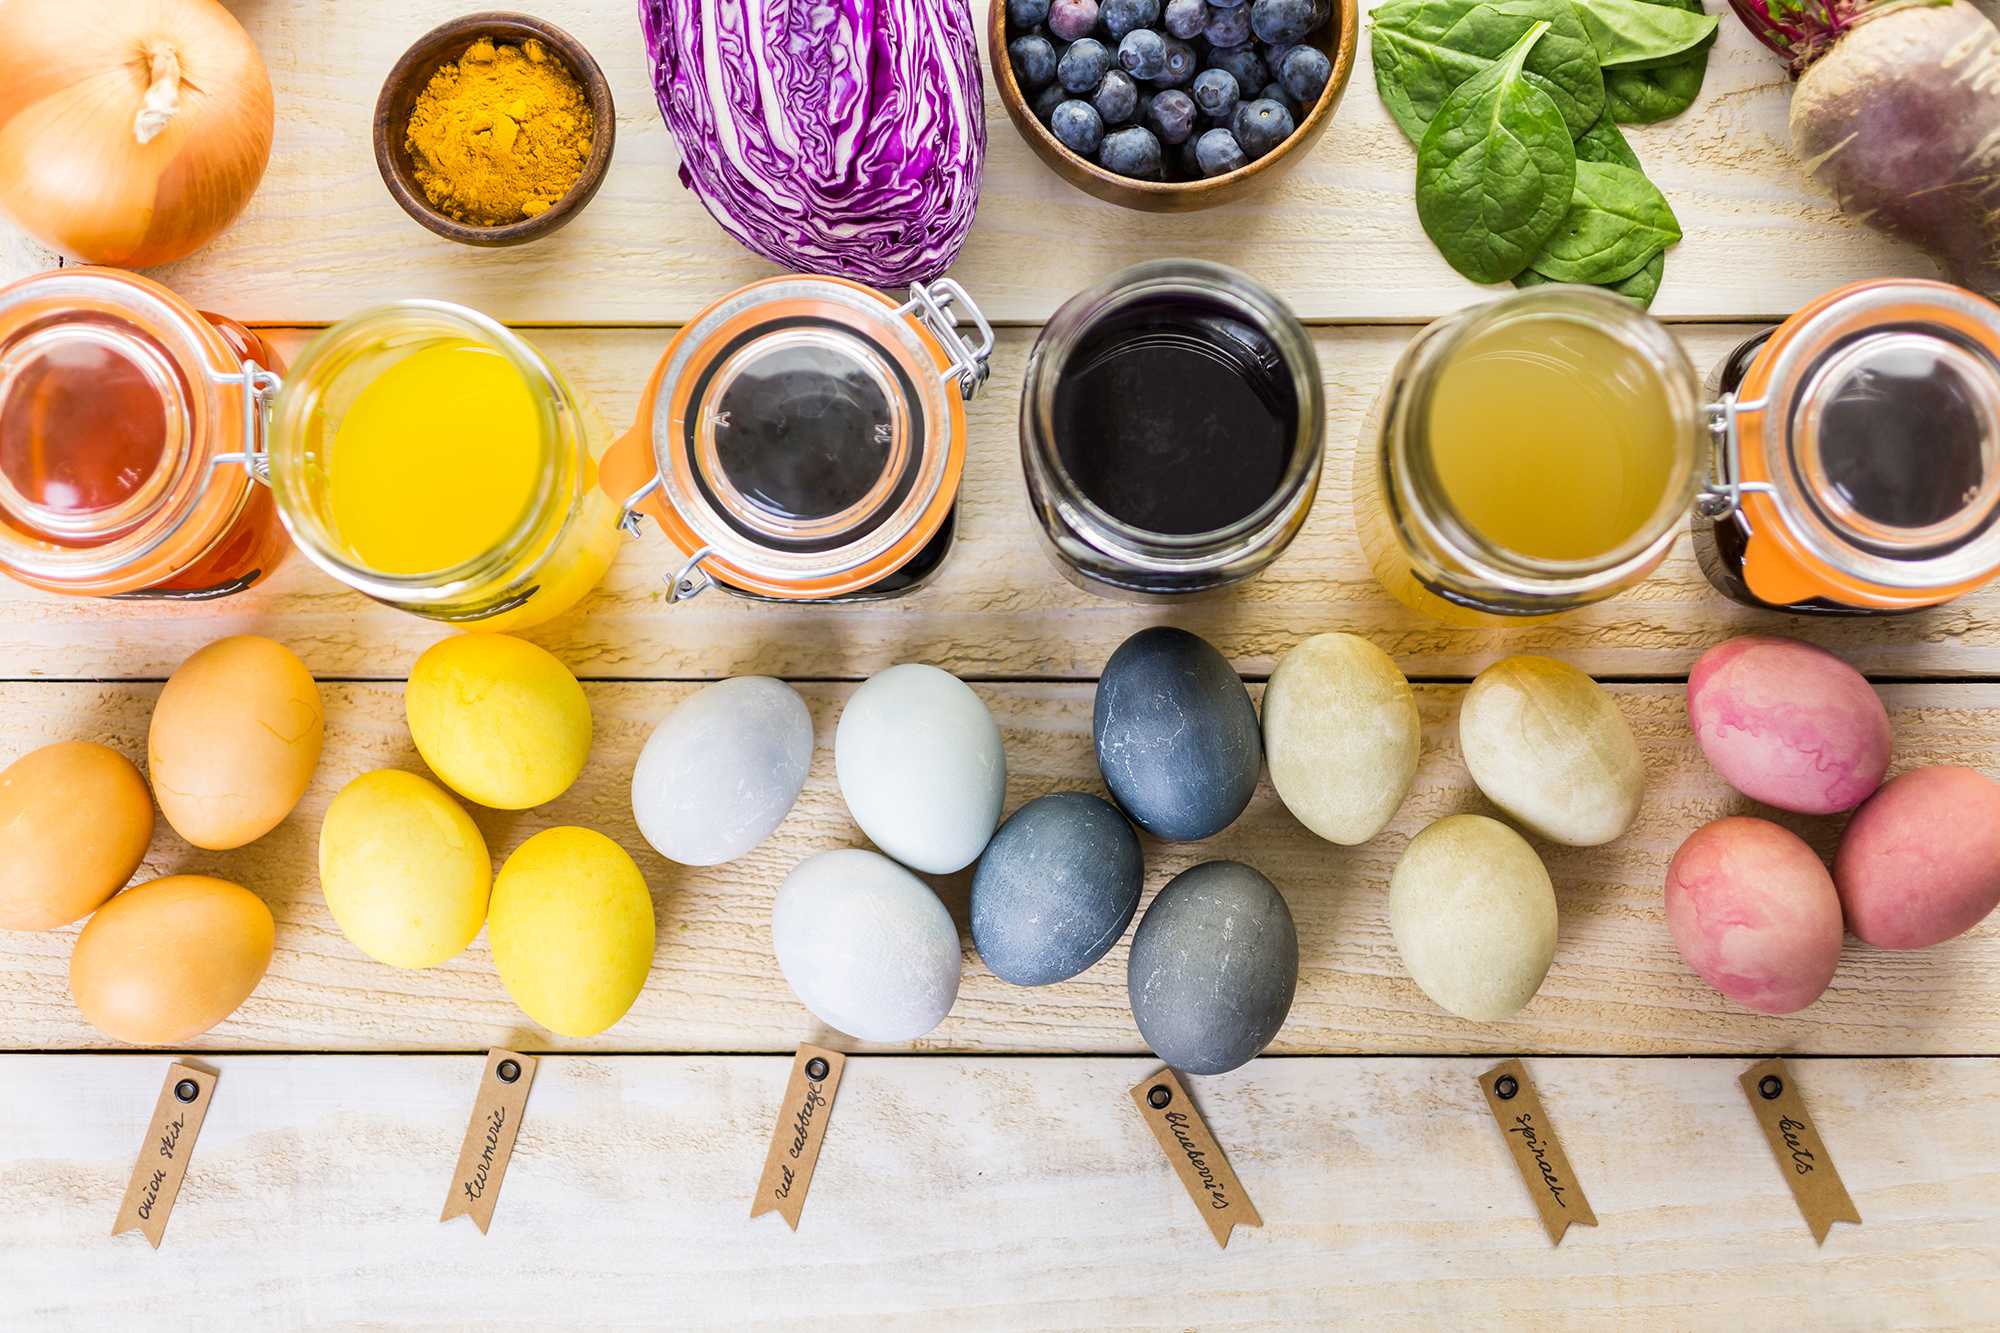 How to make natural Easter egg dye from ingredients in your kitchen